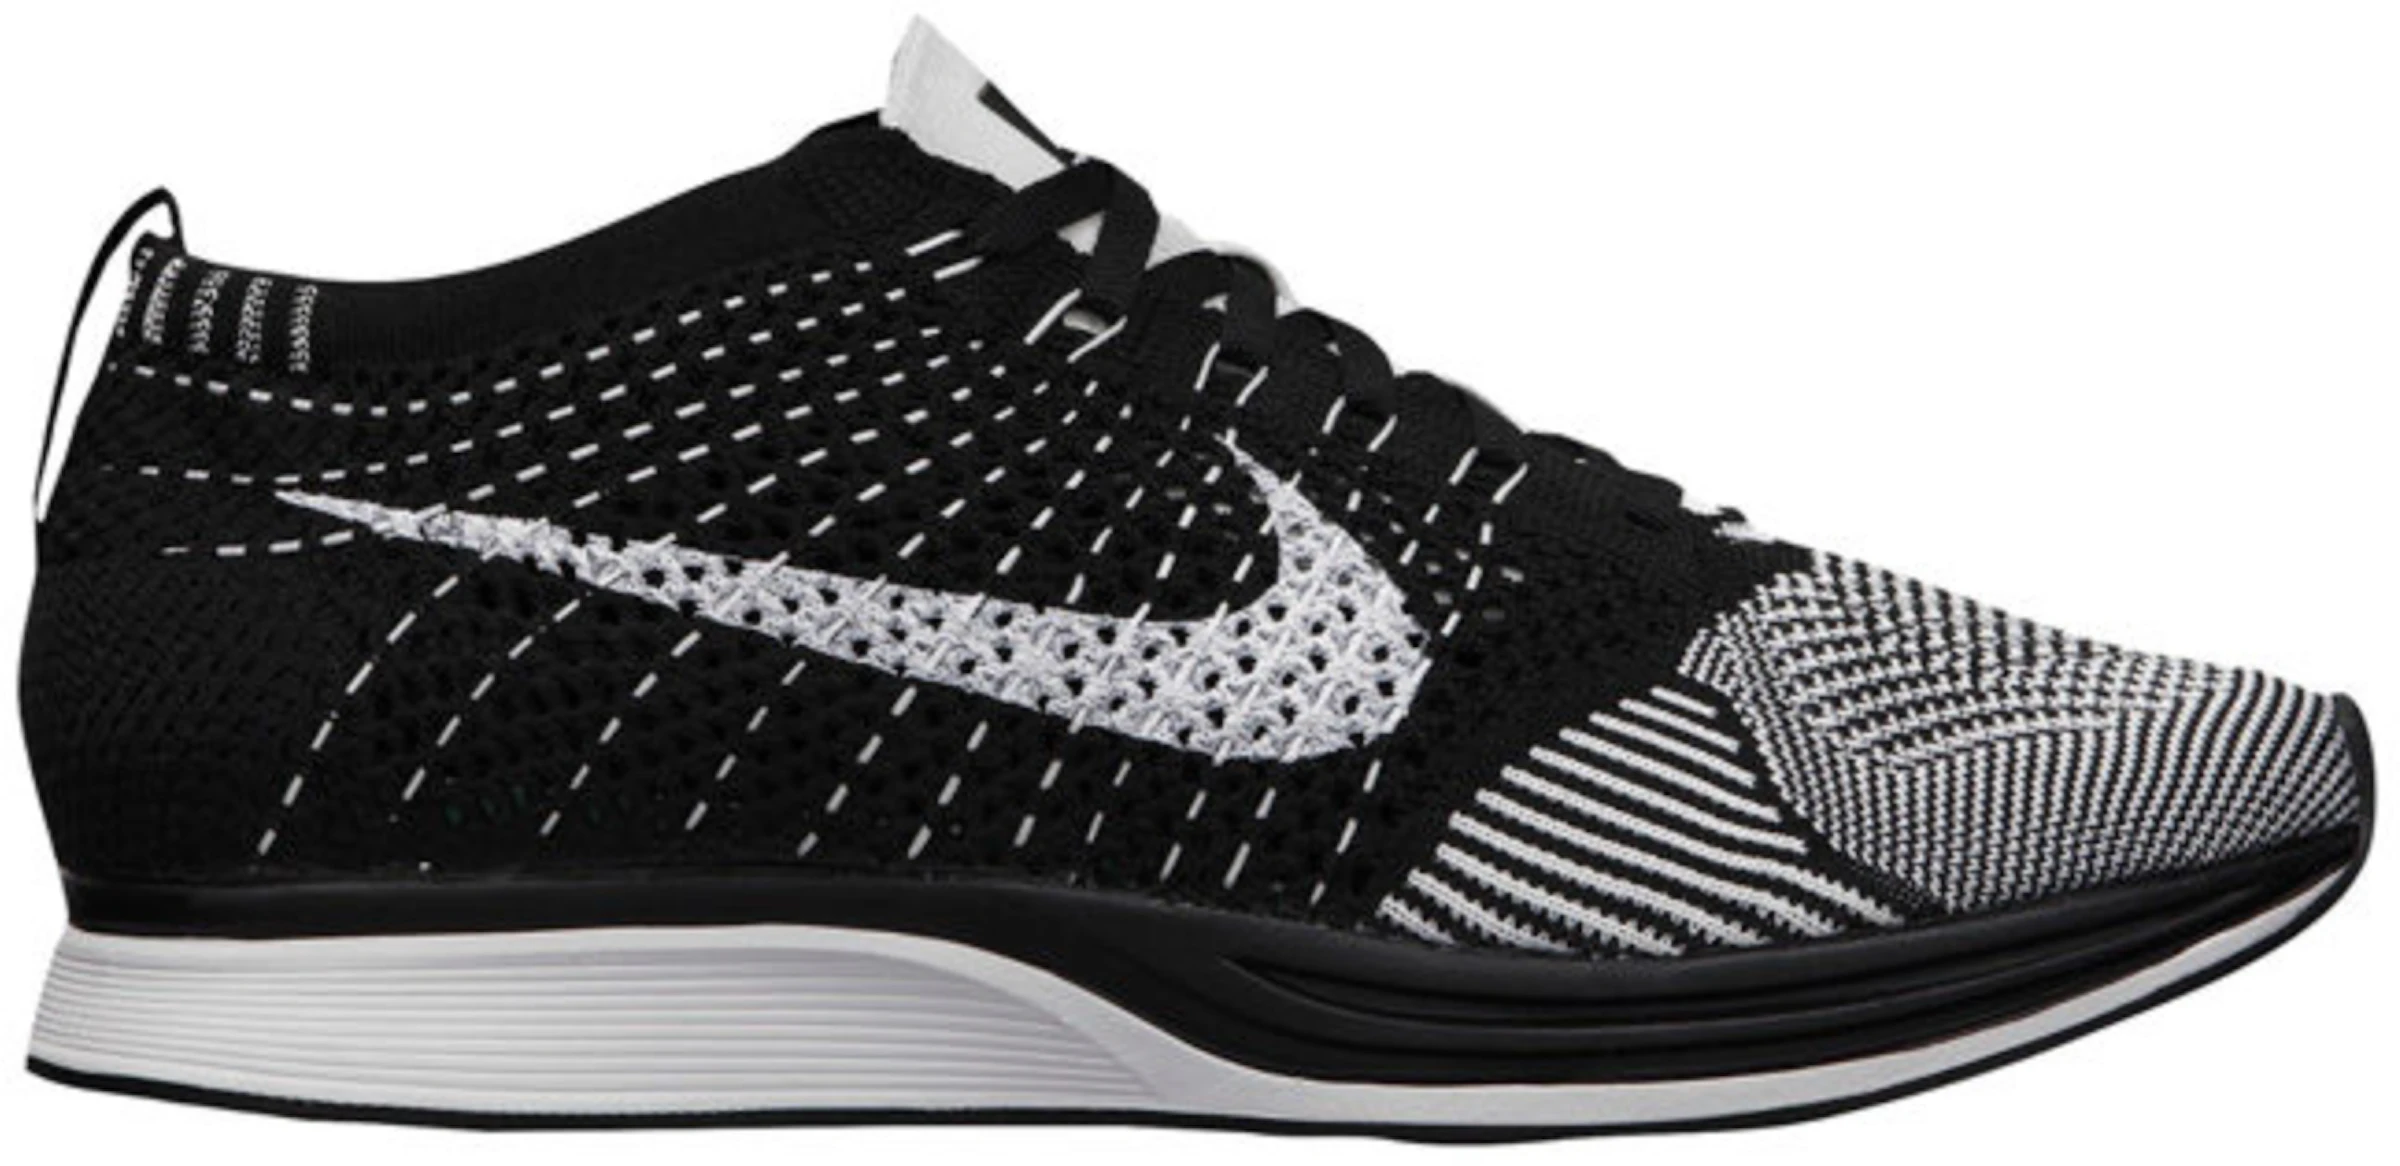 Flyknit Racer Orca Tongue (2013) - 526628-002